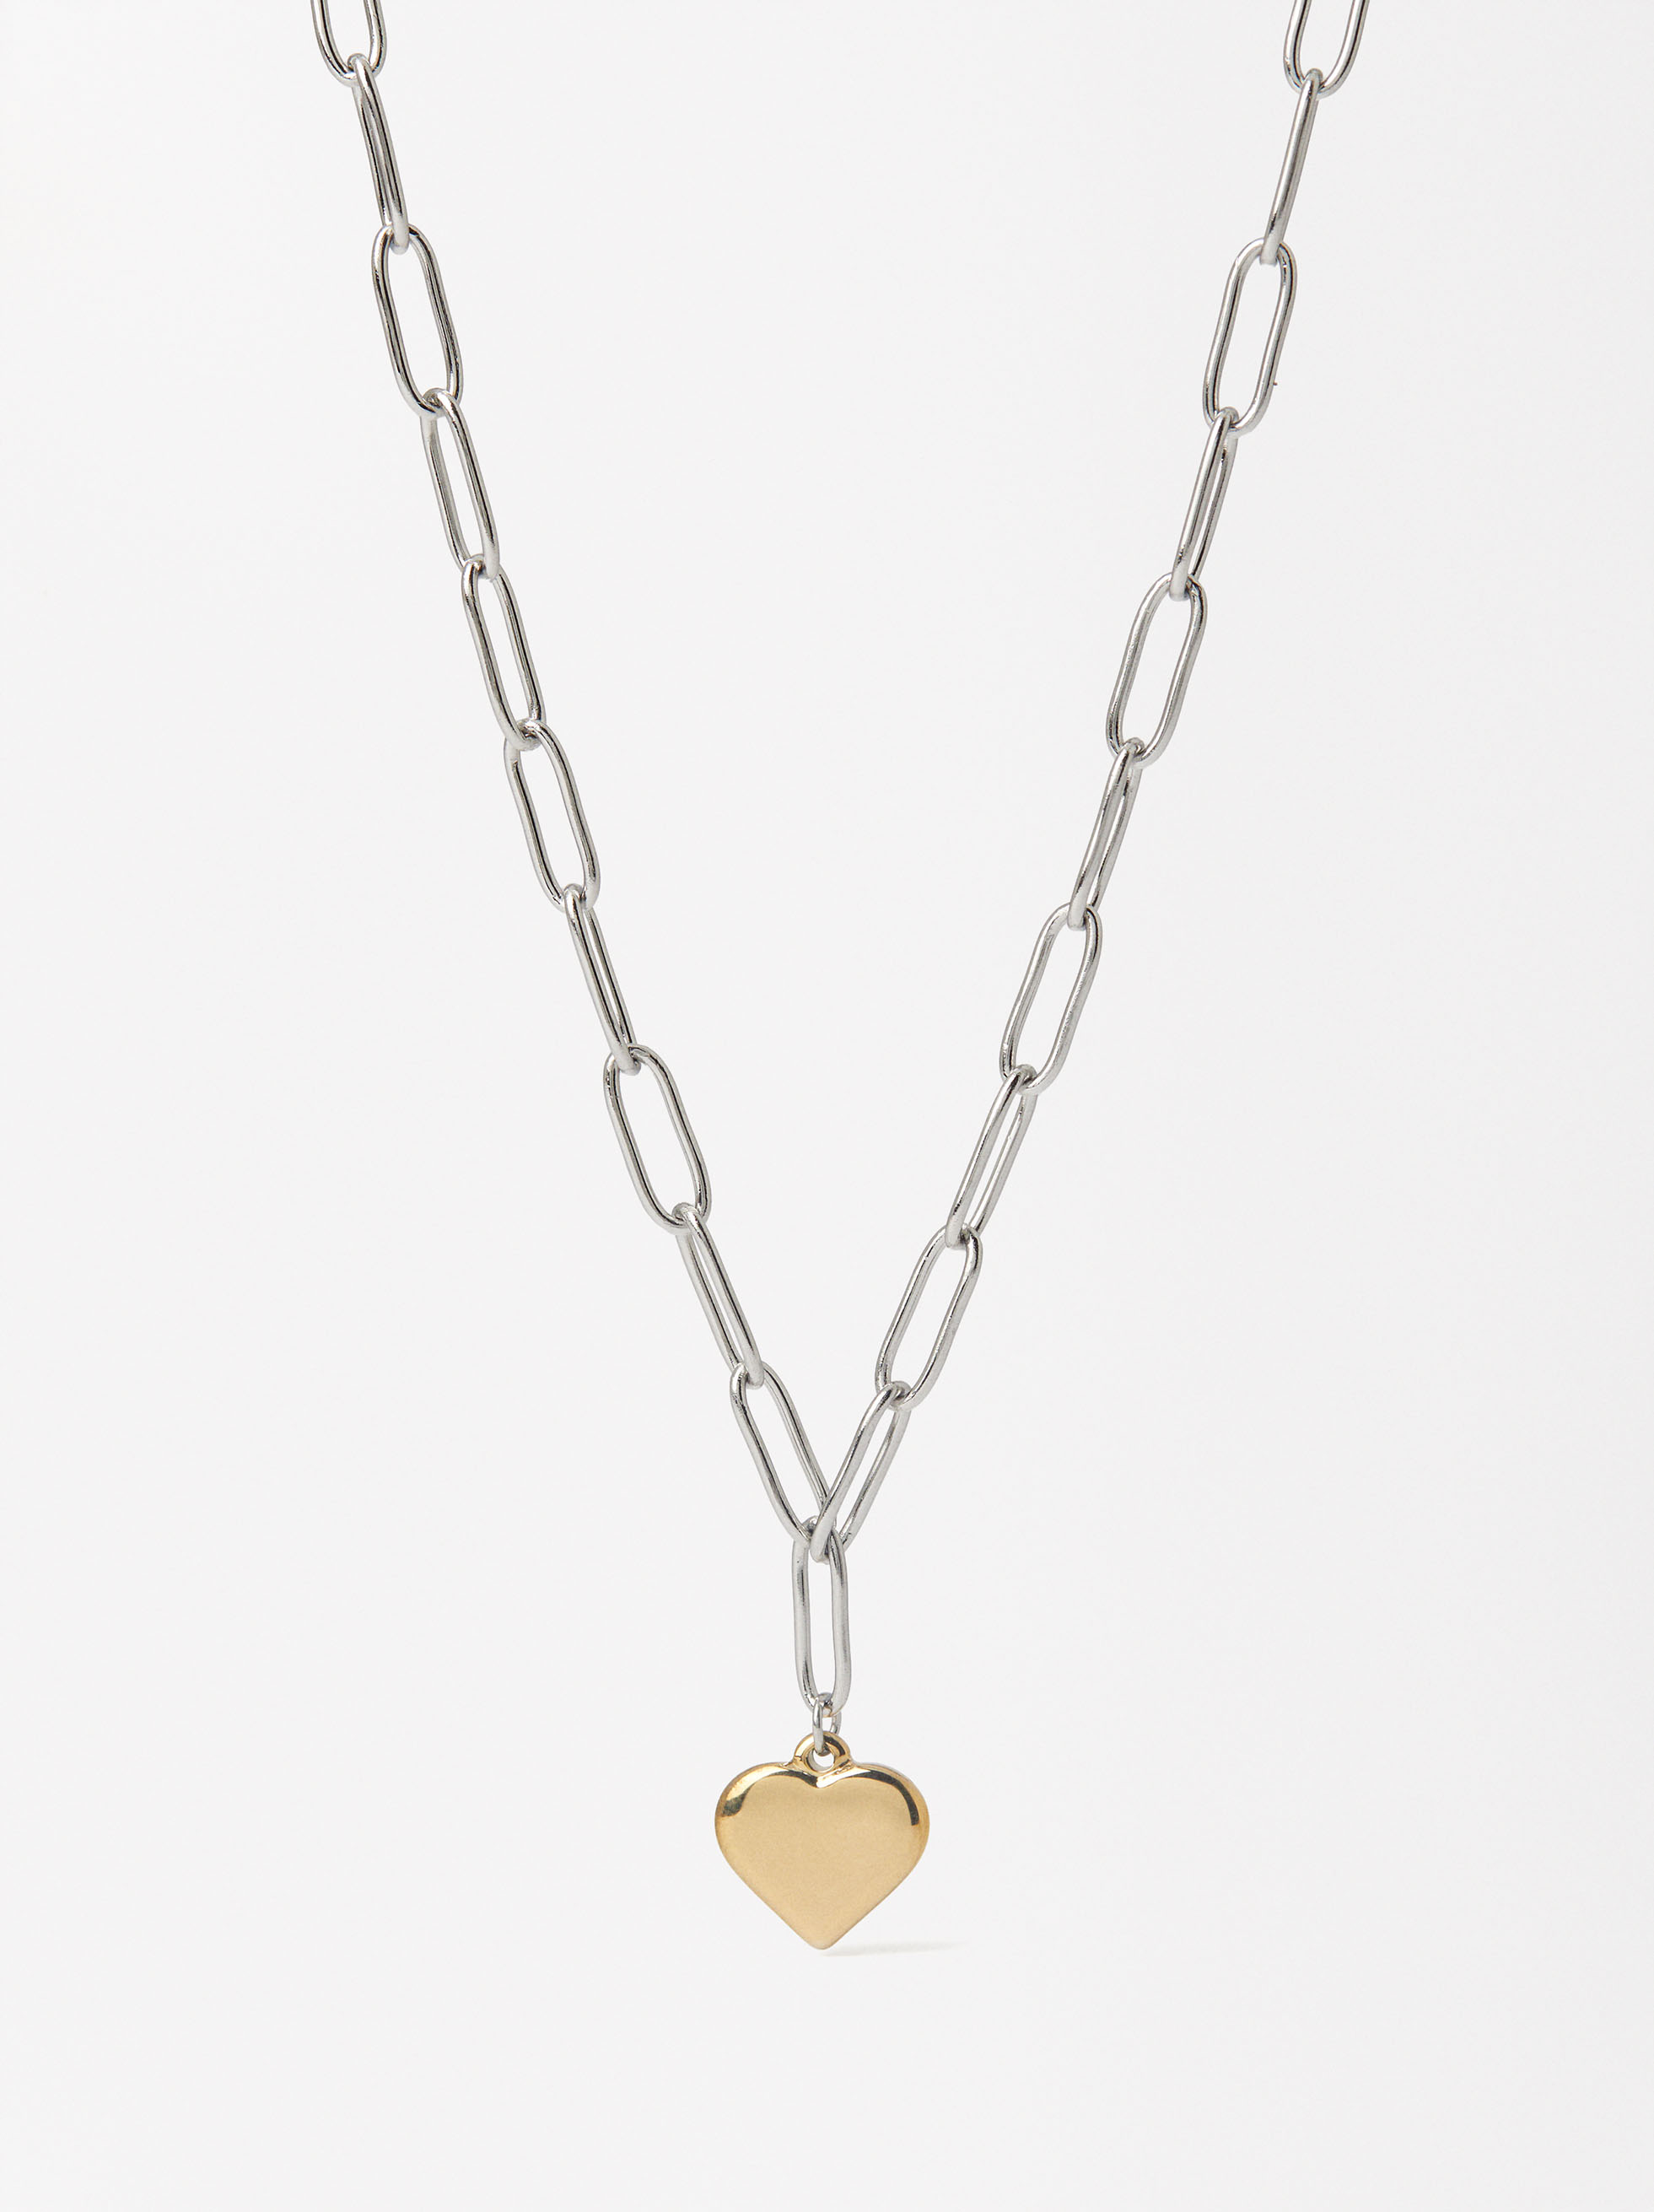 Heart Link Necklace - Stainless Steel image number 2.0